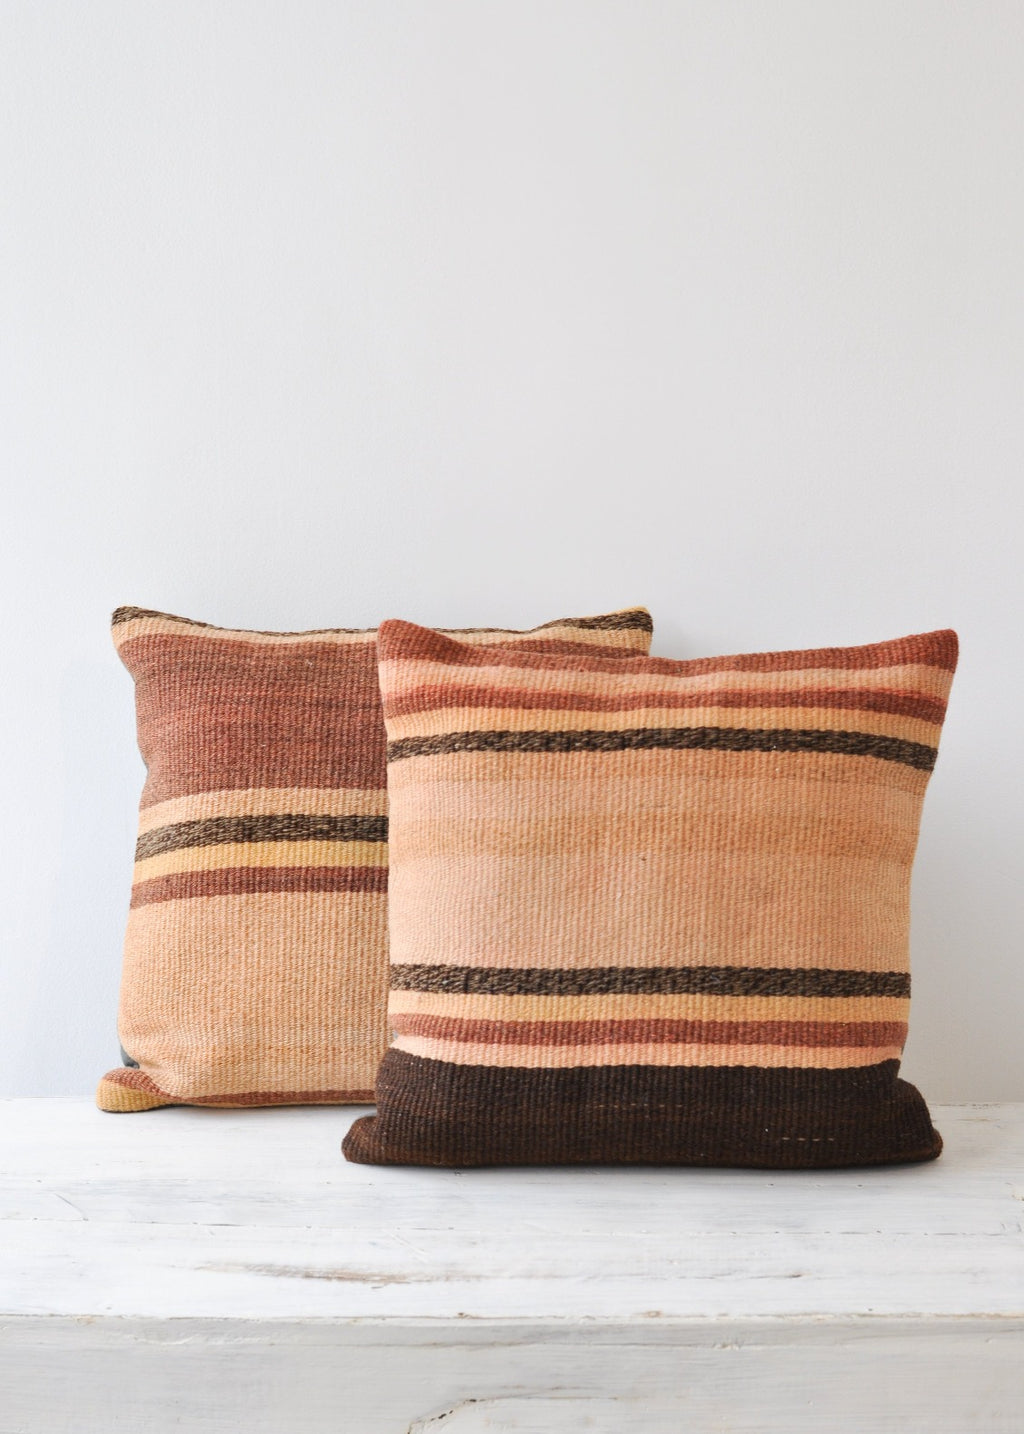 2: Two square kilim pillows with rust, adobe, and brown stripes. 